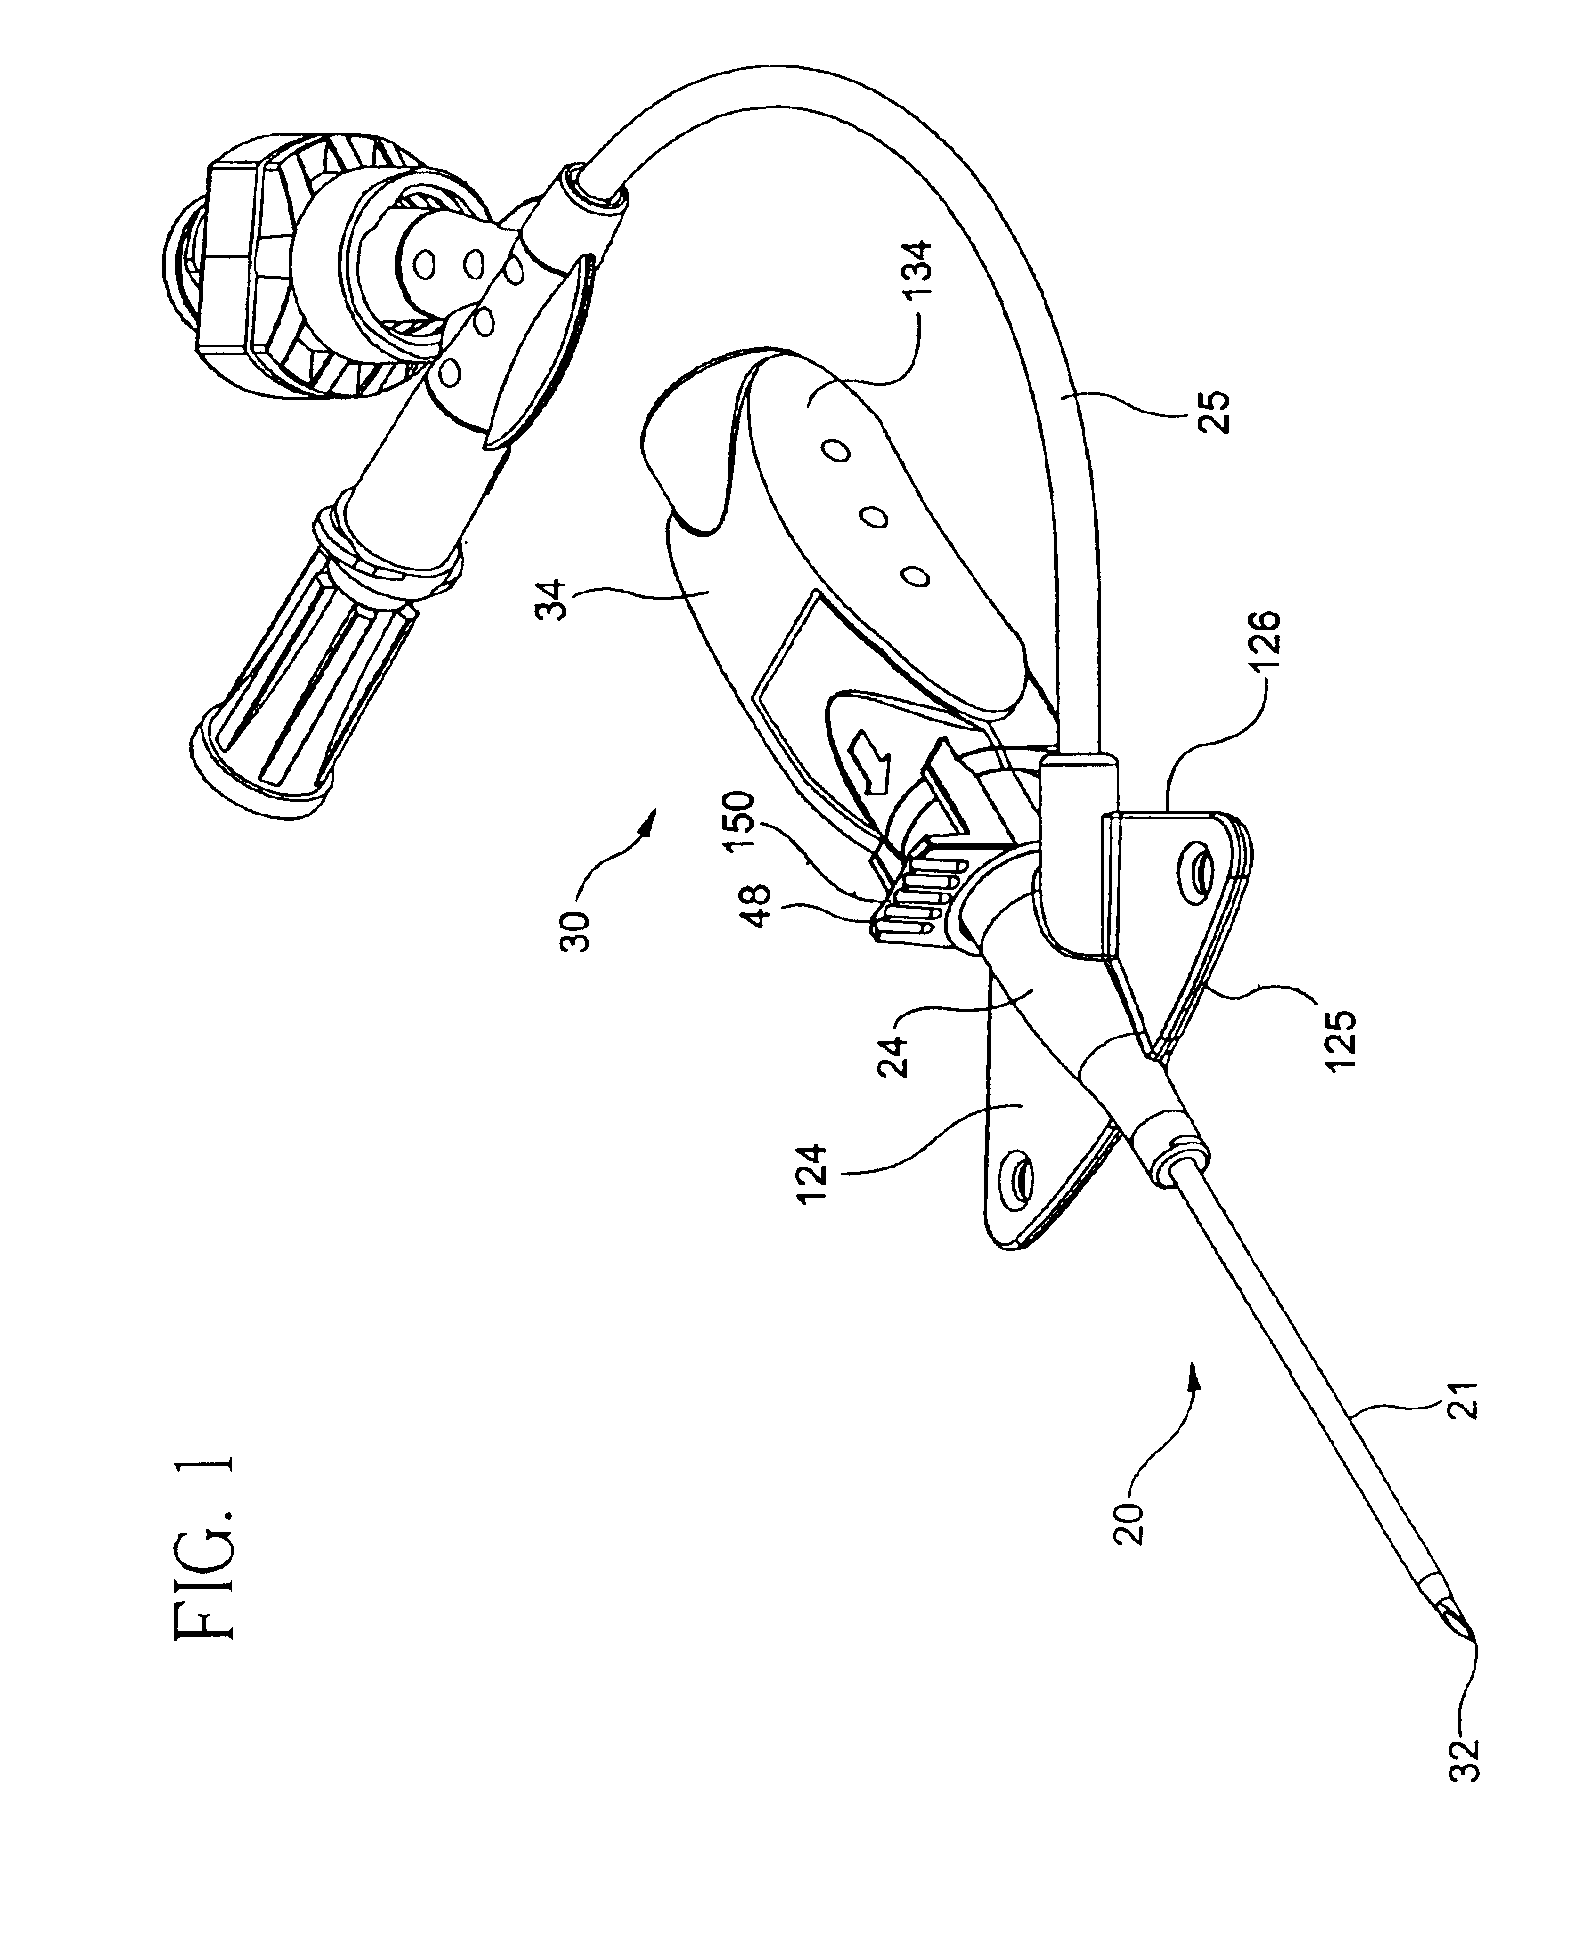 Cantilever push tab for an intravenous medical device